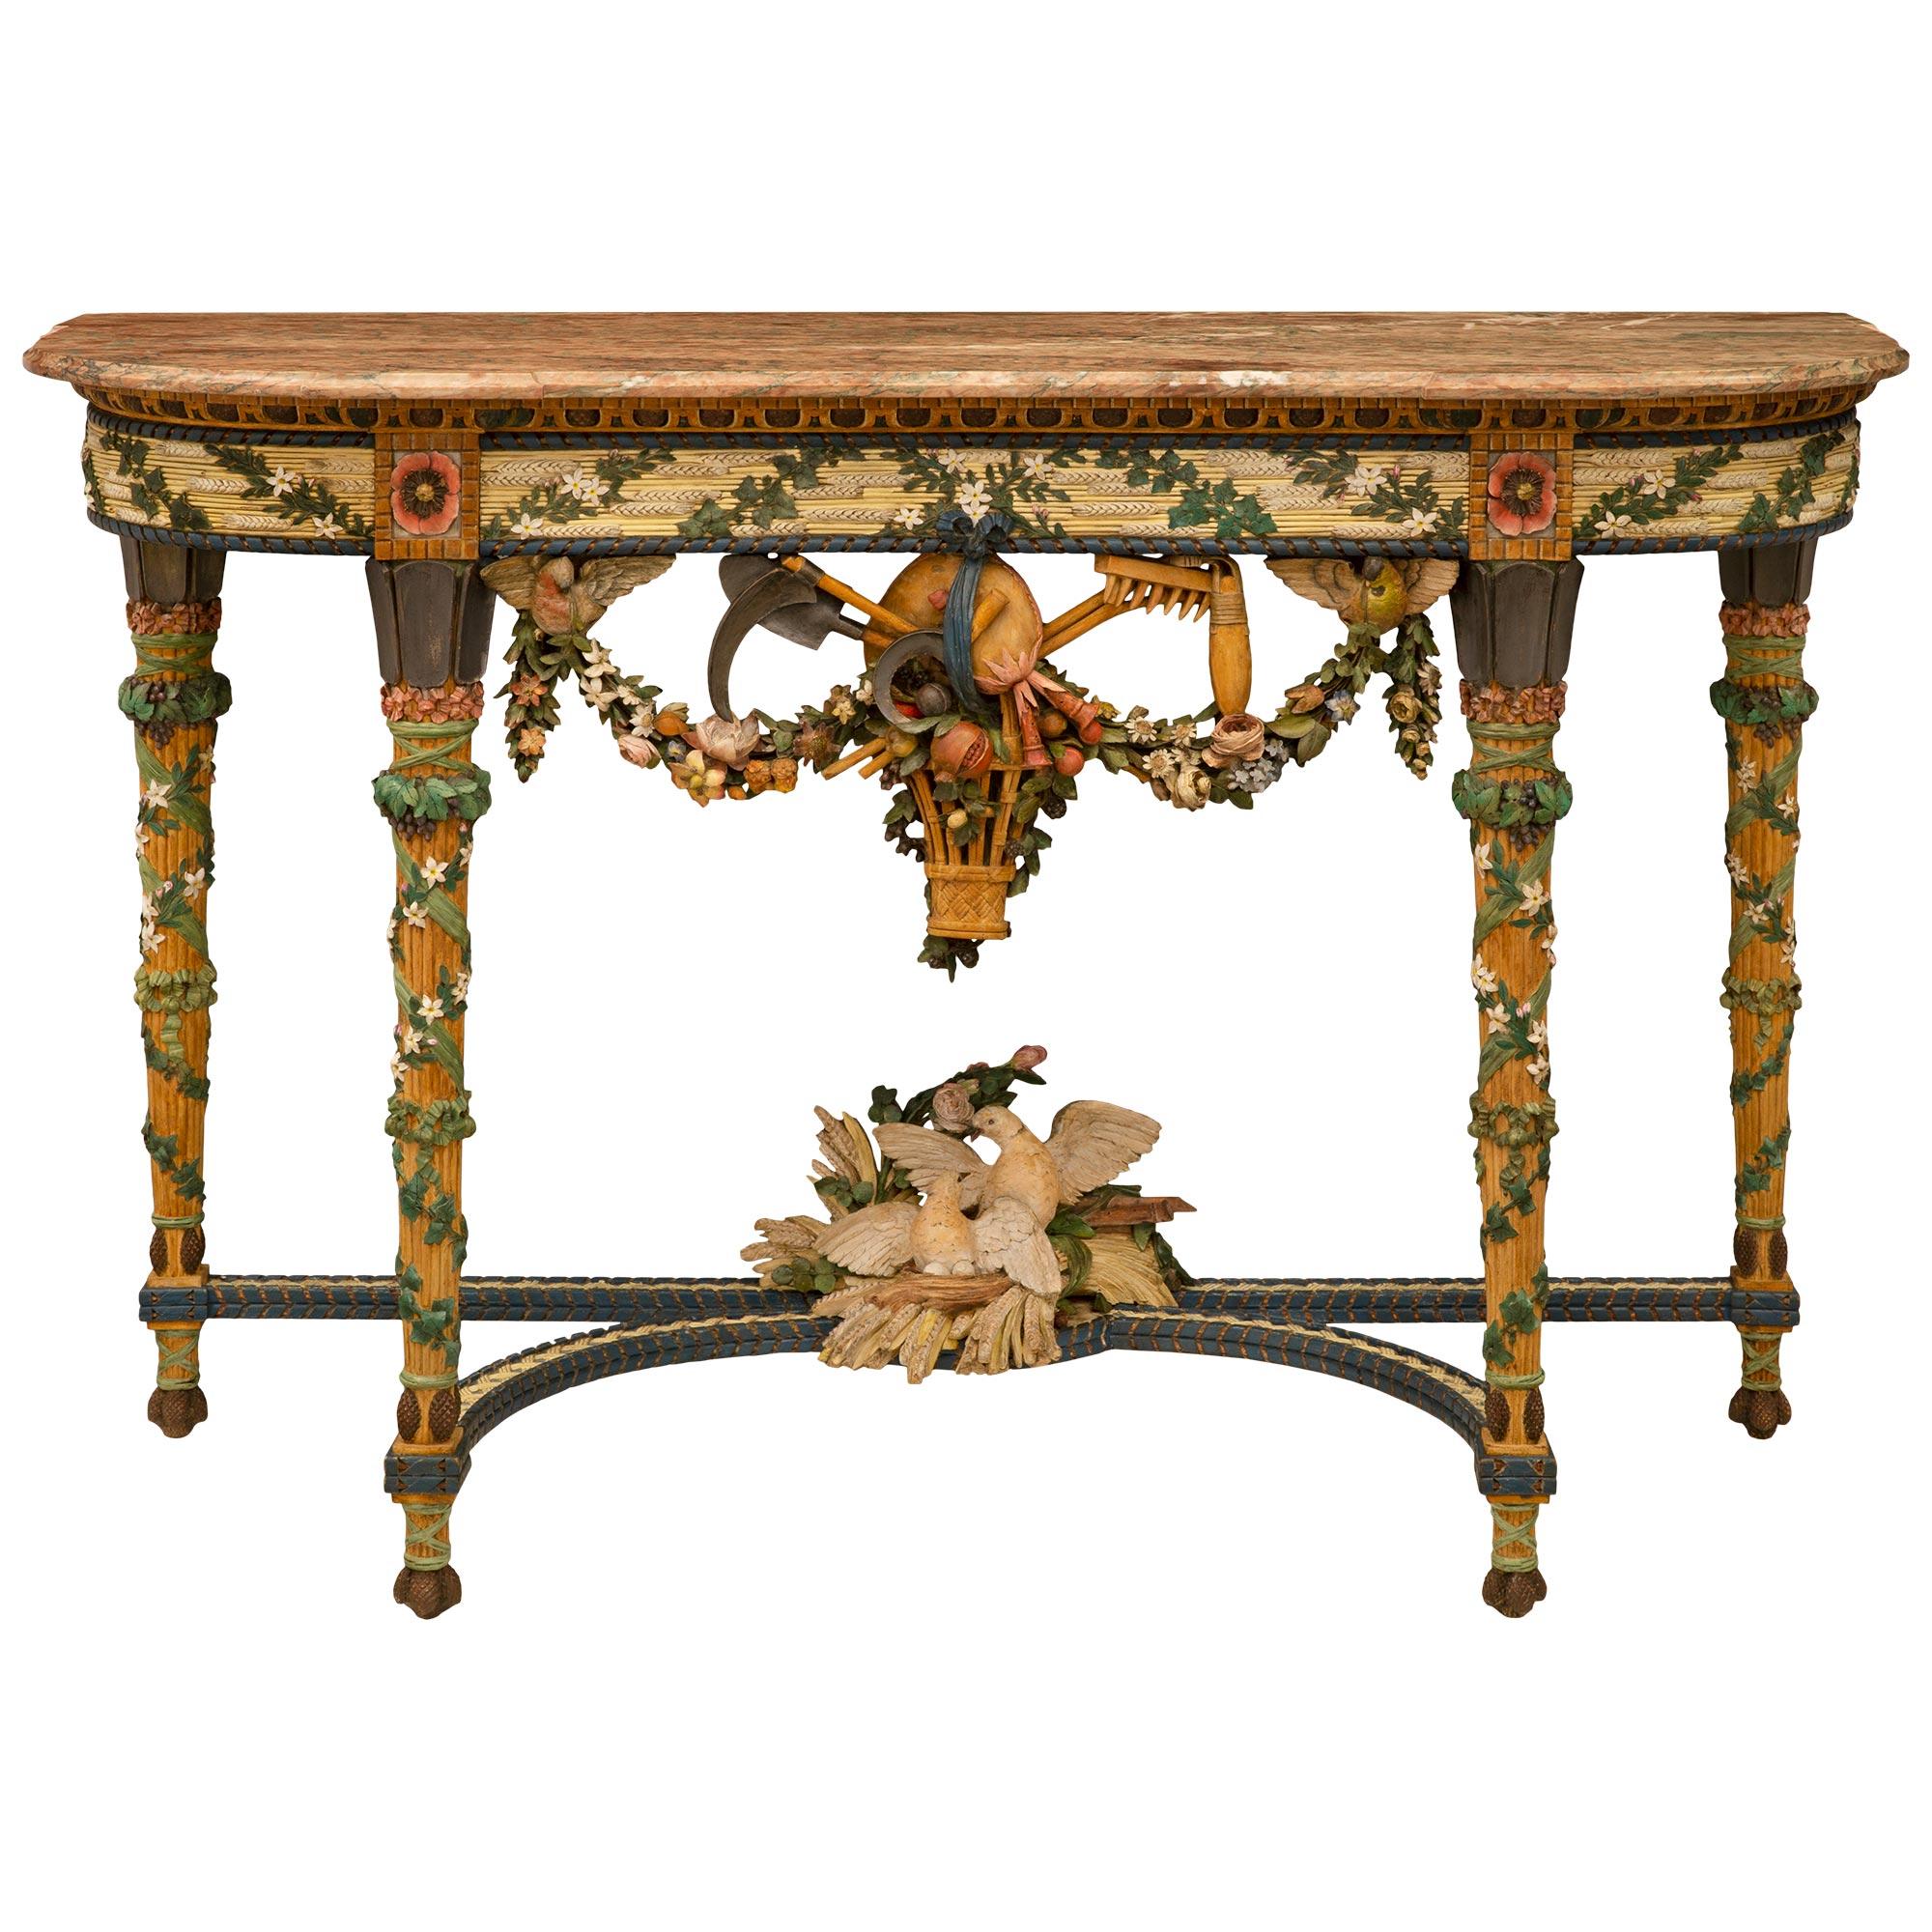 A stunning and extremely decorative French 19th century Louis XVI st. patinated wood and Campan Rubané marble console. The console is raised by elegant circular fluted tapered legs decorated with beautiful tied wrap around garlands and blooming